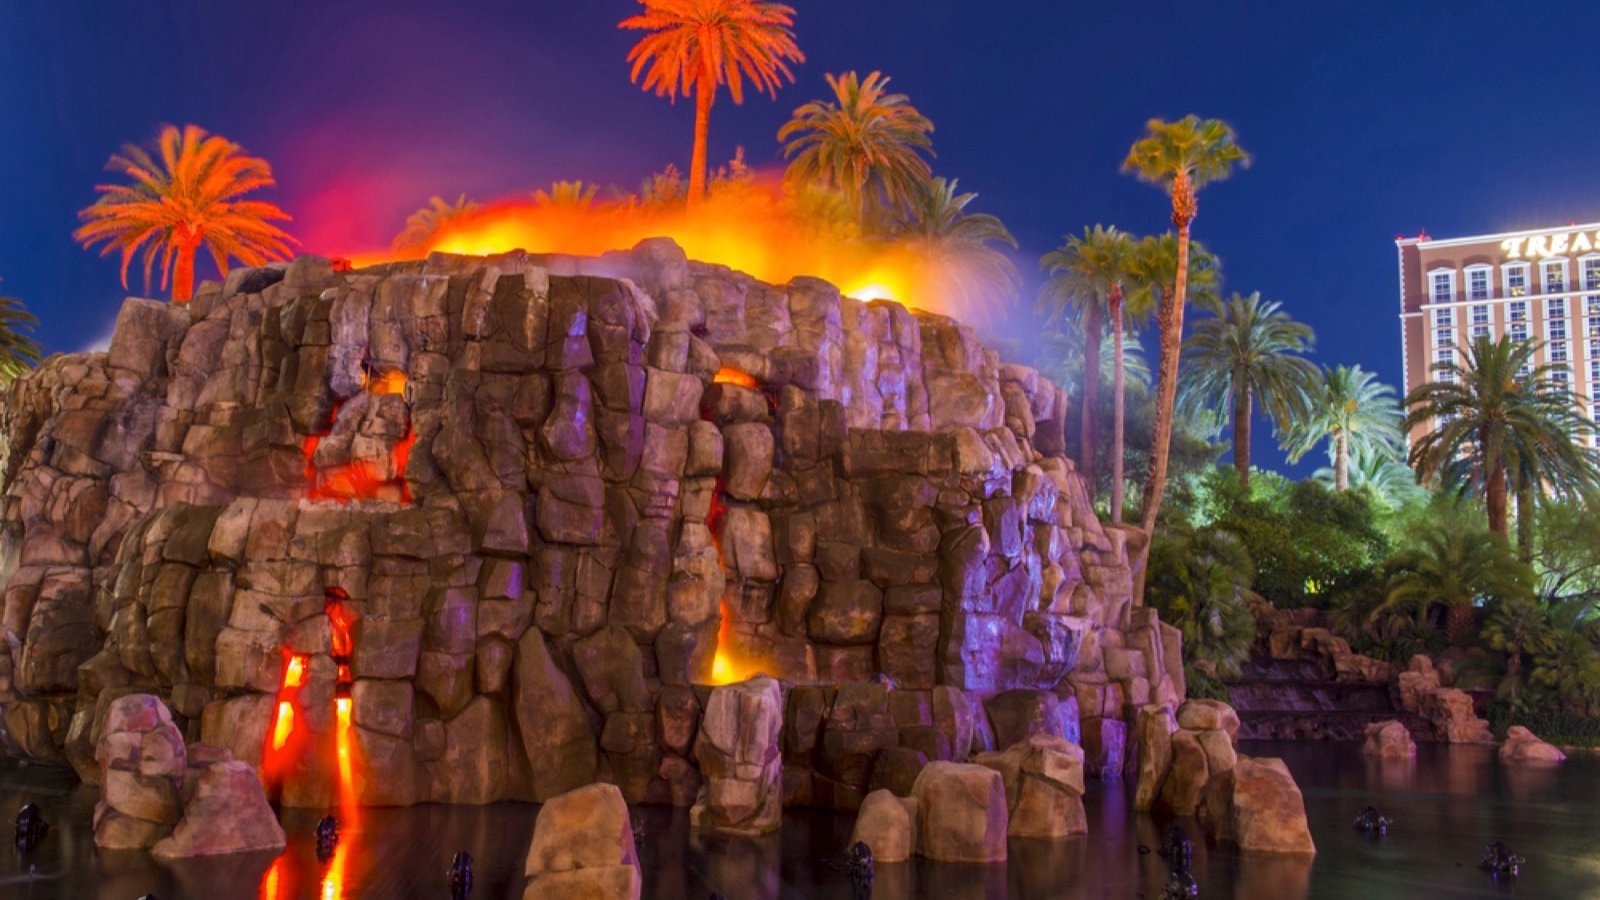 <p>Who wouldn’t want to see a volcano erupt with fire, smoke, and lava right in front of their hotel? Well, that is exactly what this volcano does. Every night on the hour from 8 p.m. to 11 p.m., you’ll see a show unlike any you have ever seen before.</p>